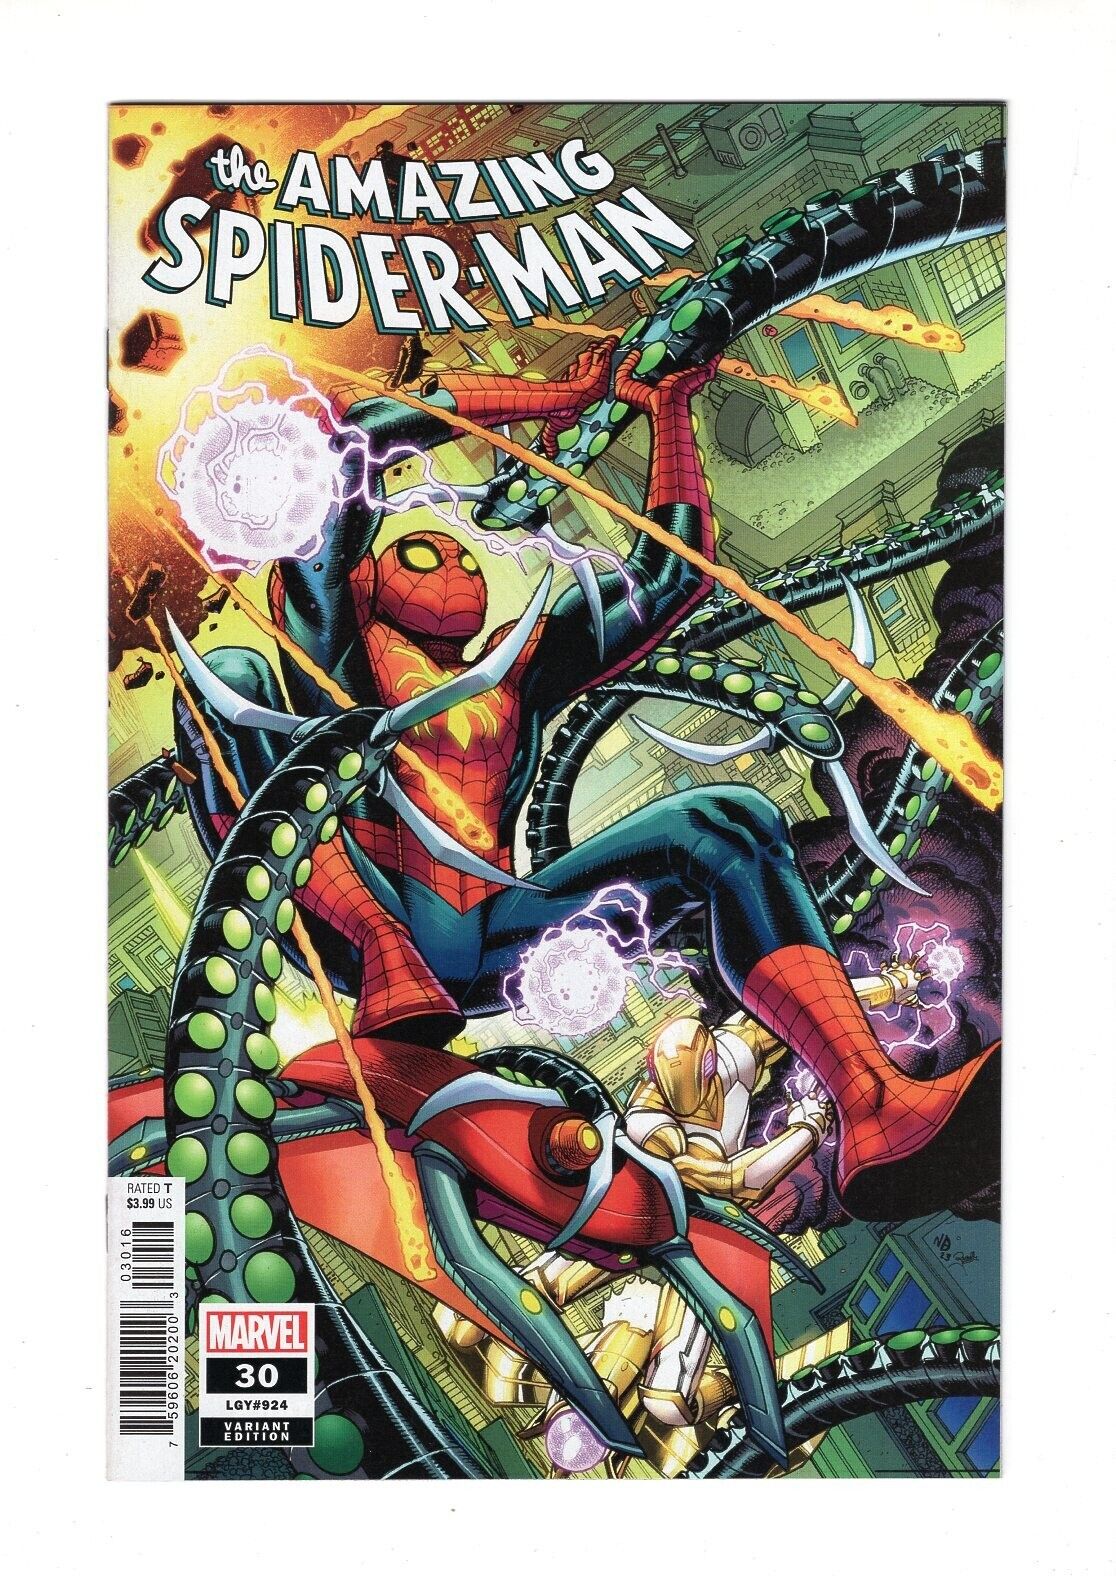 AMAZING SPIDER-MAN #30 NICK BRADSHAW 1:25 VARIANT COVER NM DOCTOR OCTOPUS MARVEL